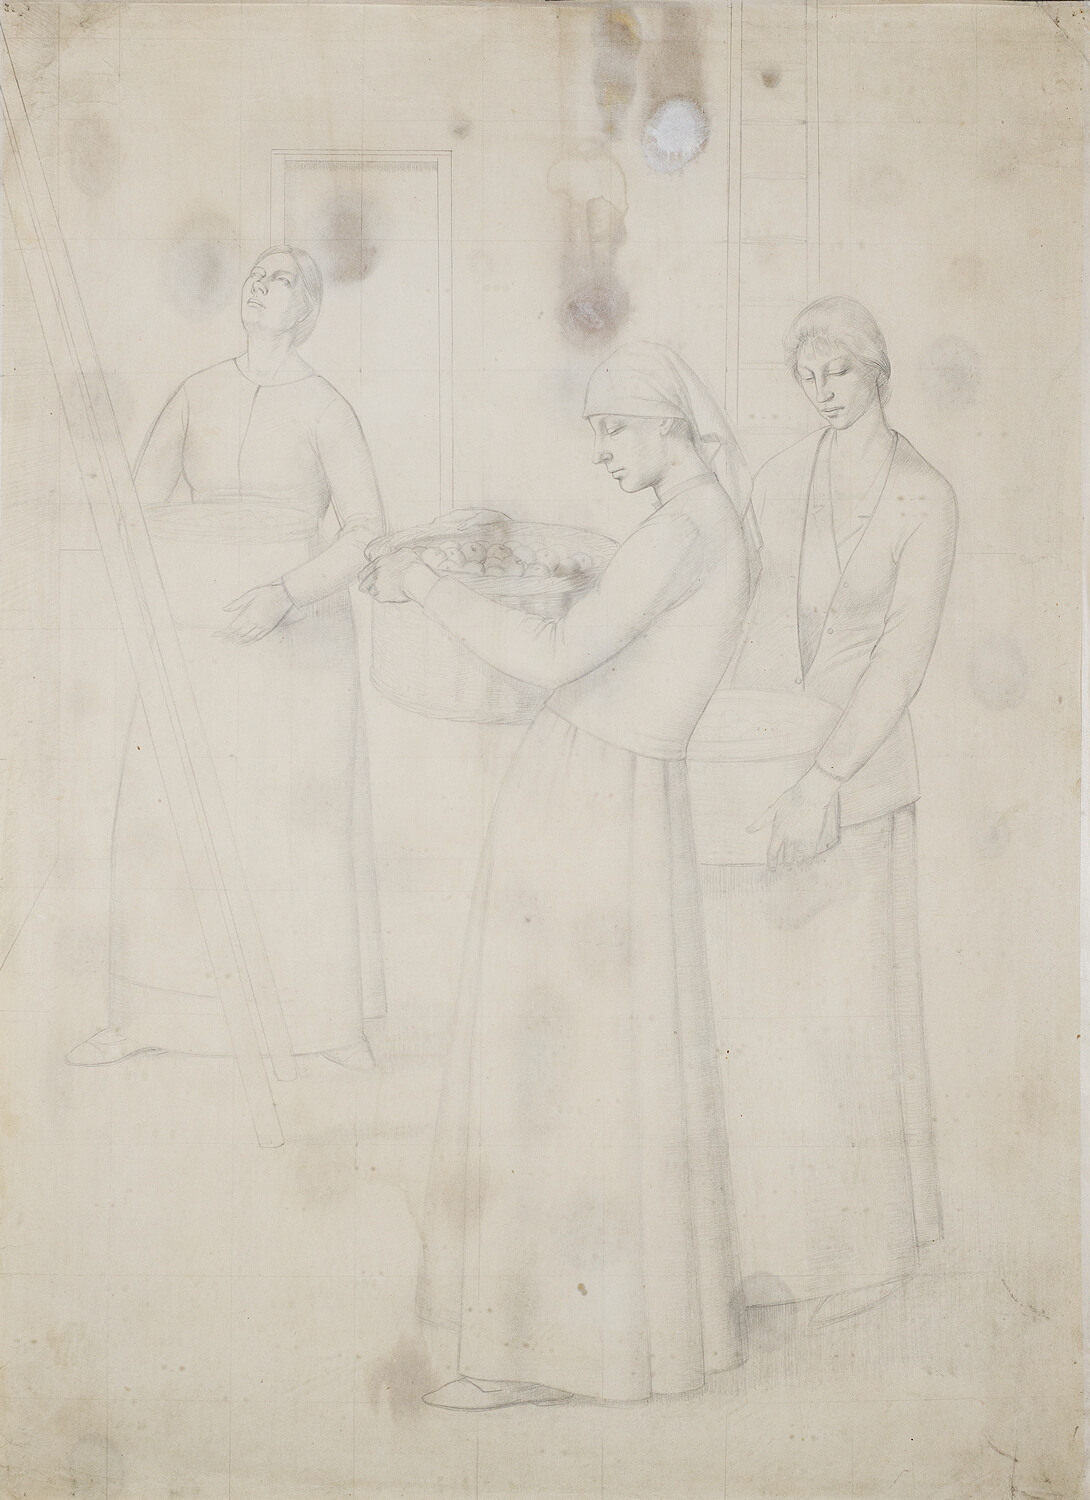 Winifred Knights - Study for 'Design for Wall Decoration' - Three Women Bearing Baskets of Apples